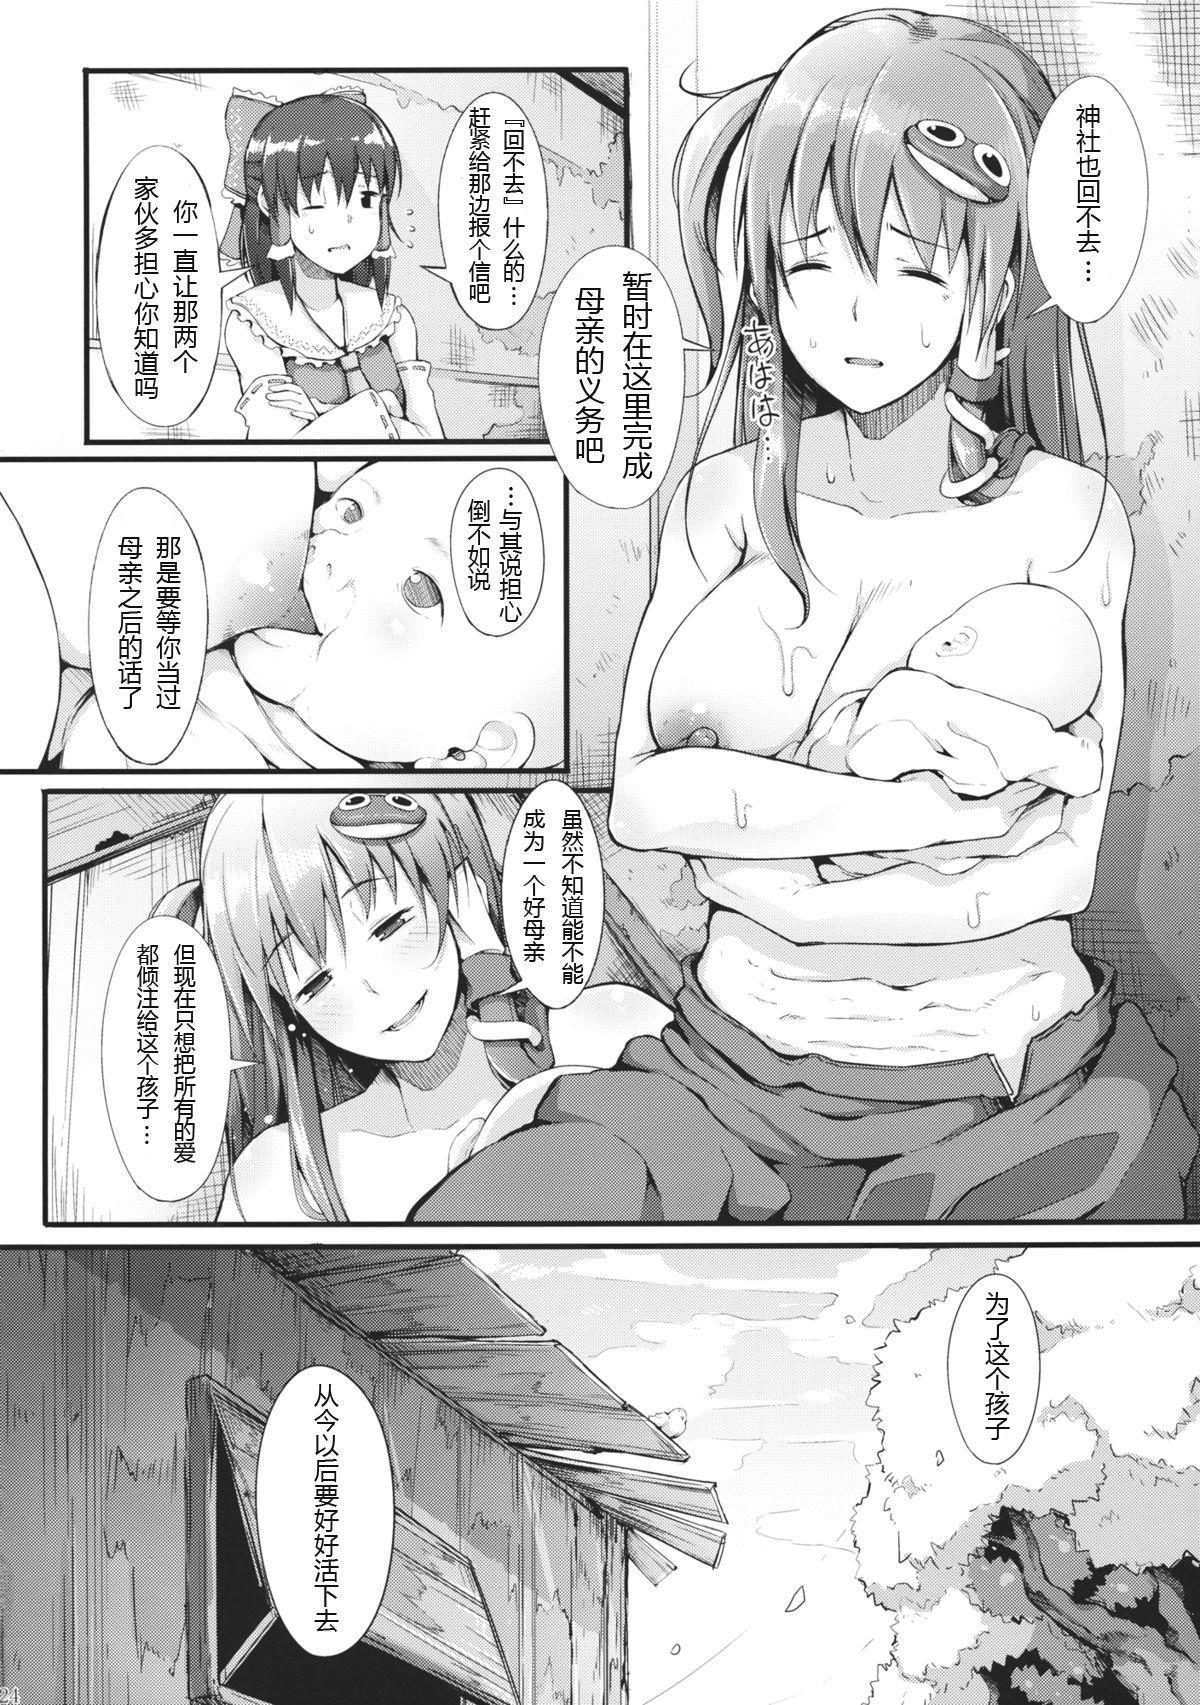 Interracial Sex memoirs - Touhou project Worship - Page 26